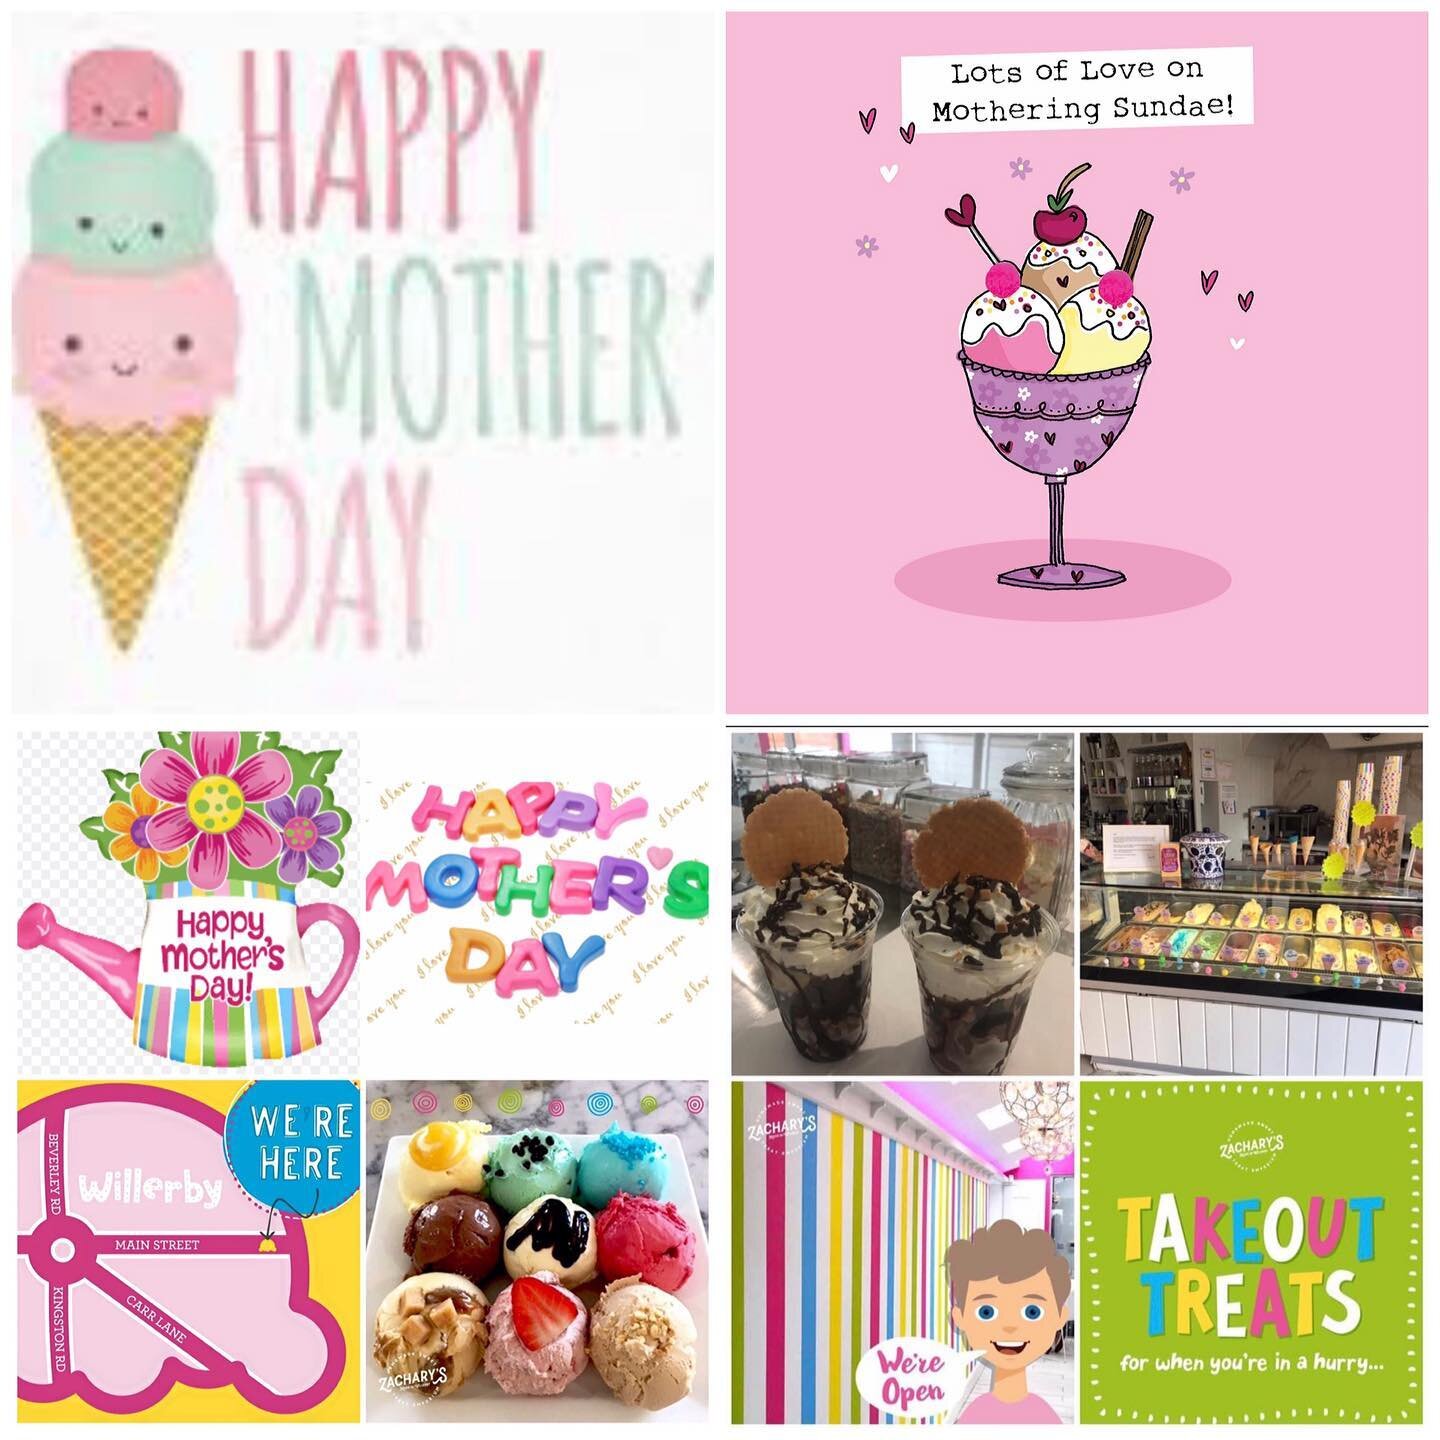 Happy Mother&rsquo;s Day to all our lovely Mummy&rsquo;s.Open today 12-4pm #gelato#homemade#willerby.🍦🍪☕️🍨🍧🍦x